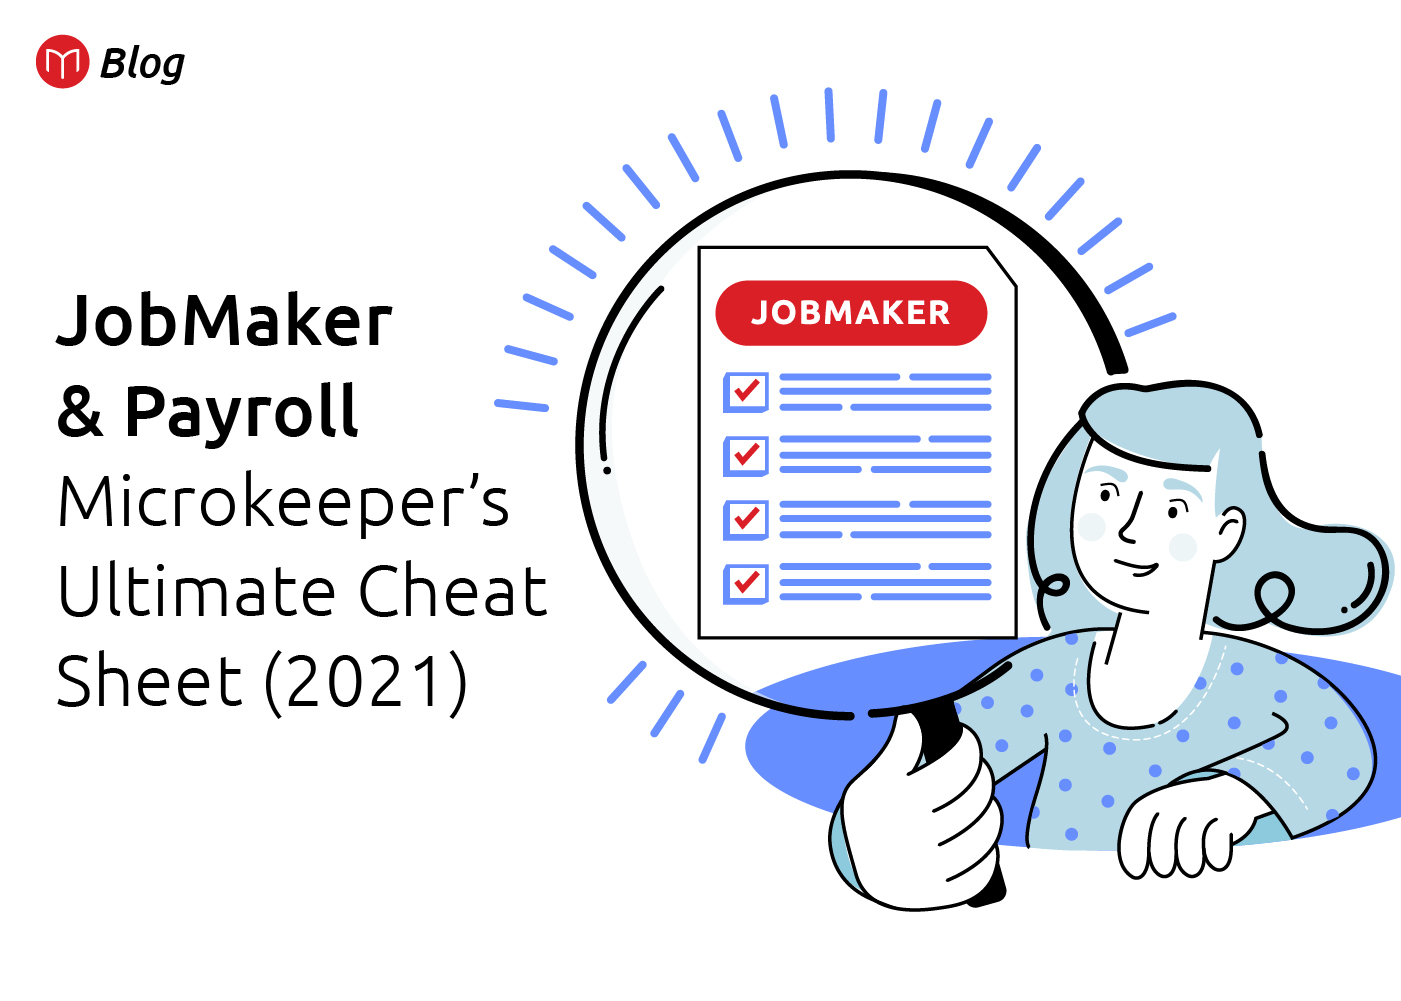 JobMaker and Payroll: The Ultimate Cheat Sheet for 2021